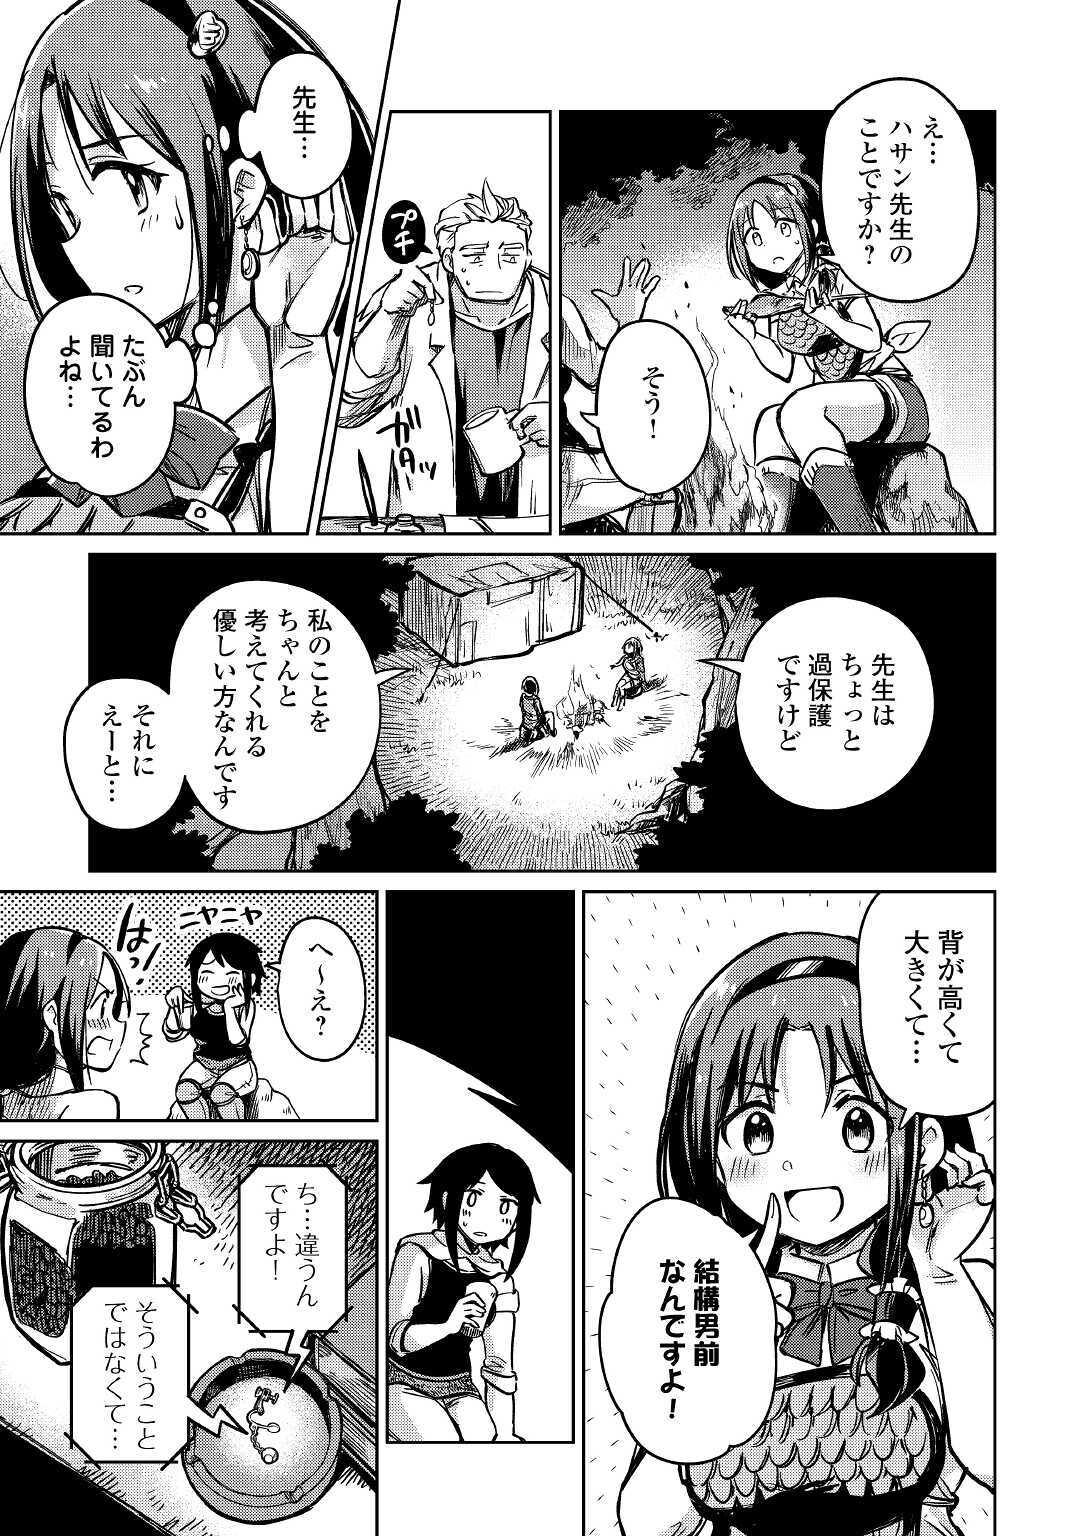 The Former Structural Researcher’s Story of Otherworldly Adventure 第26話 - Page 19